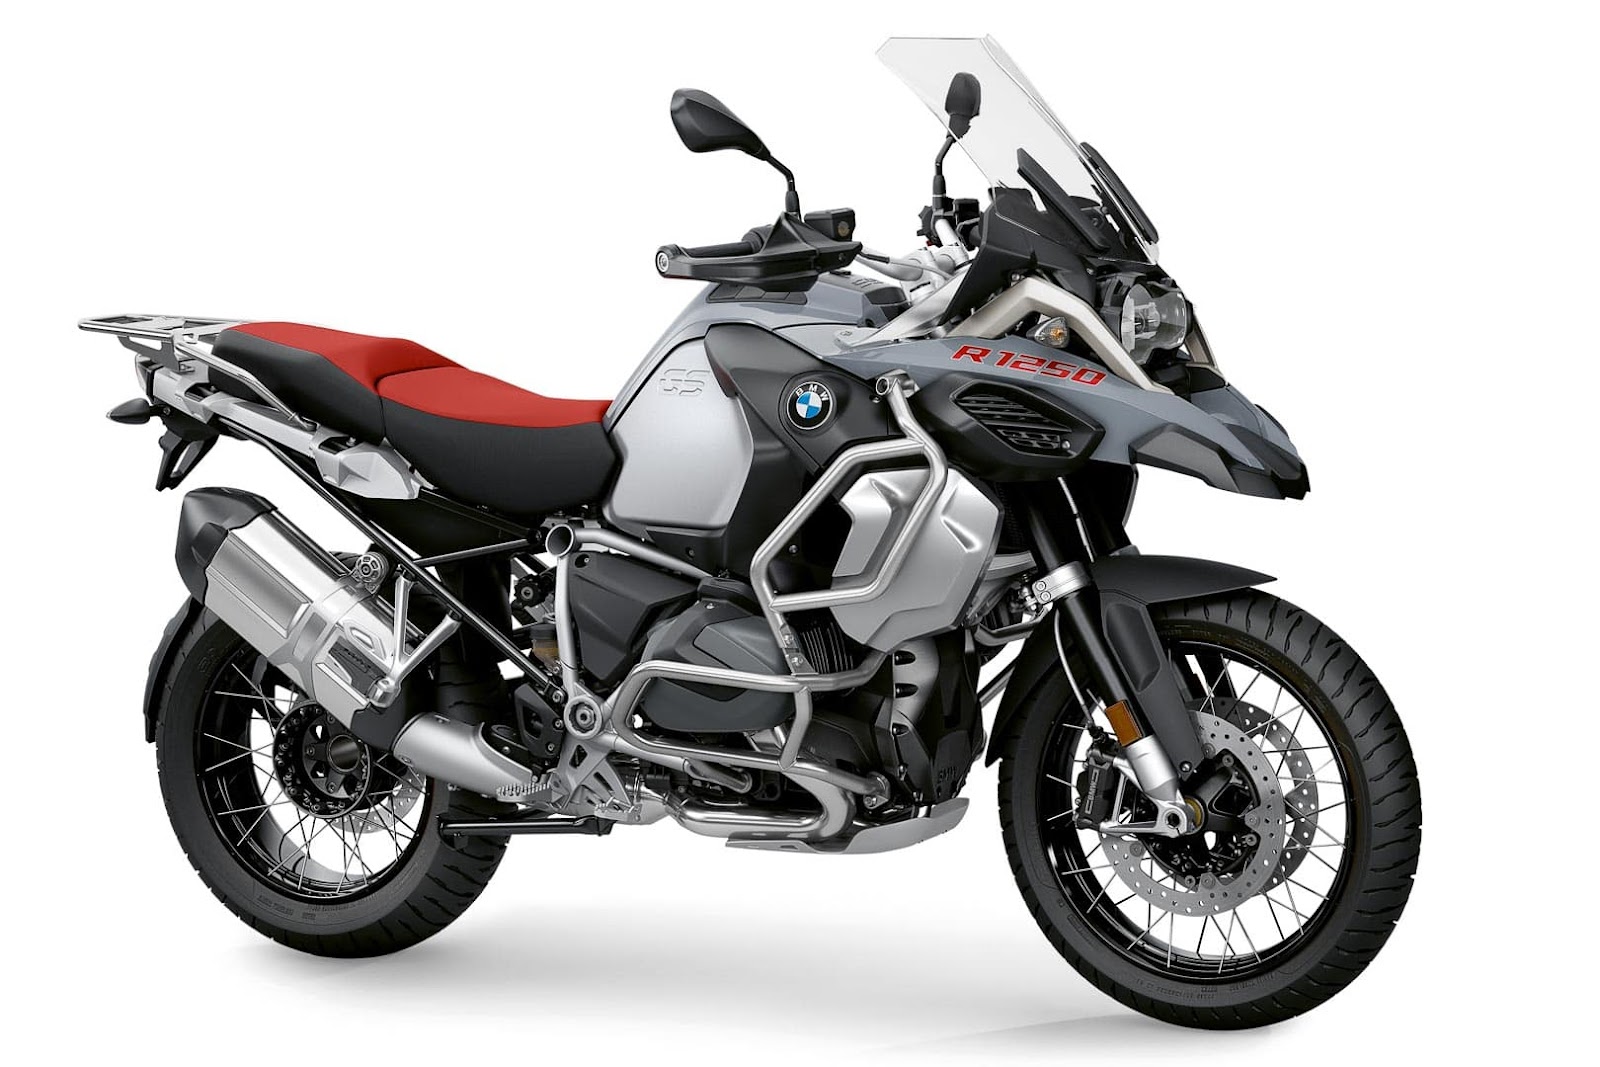 Experience the ultimate adventure with the BMW R 1250 GS Adventure motorcycle